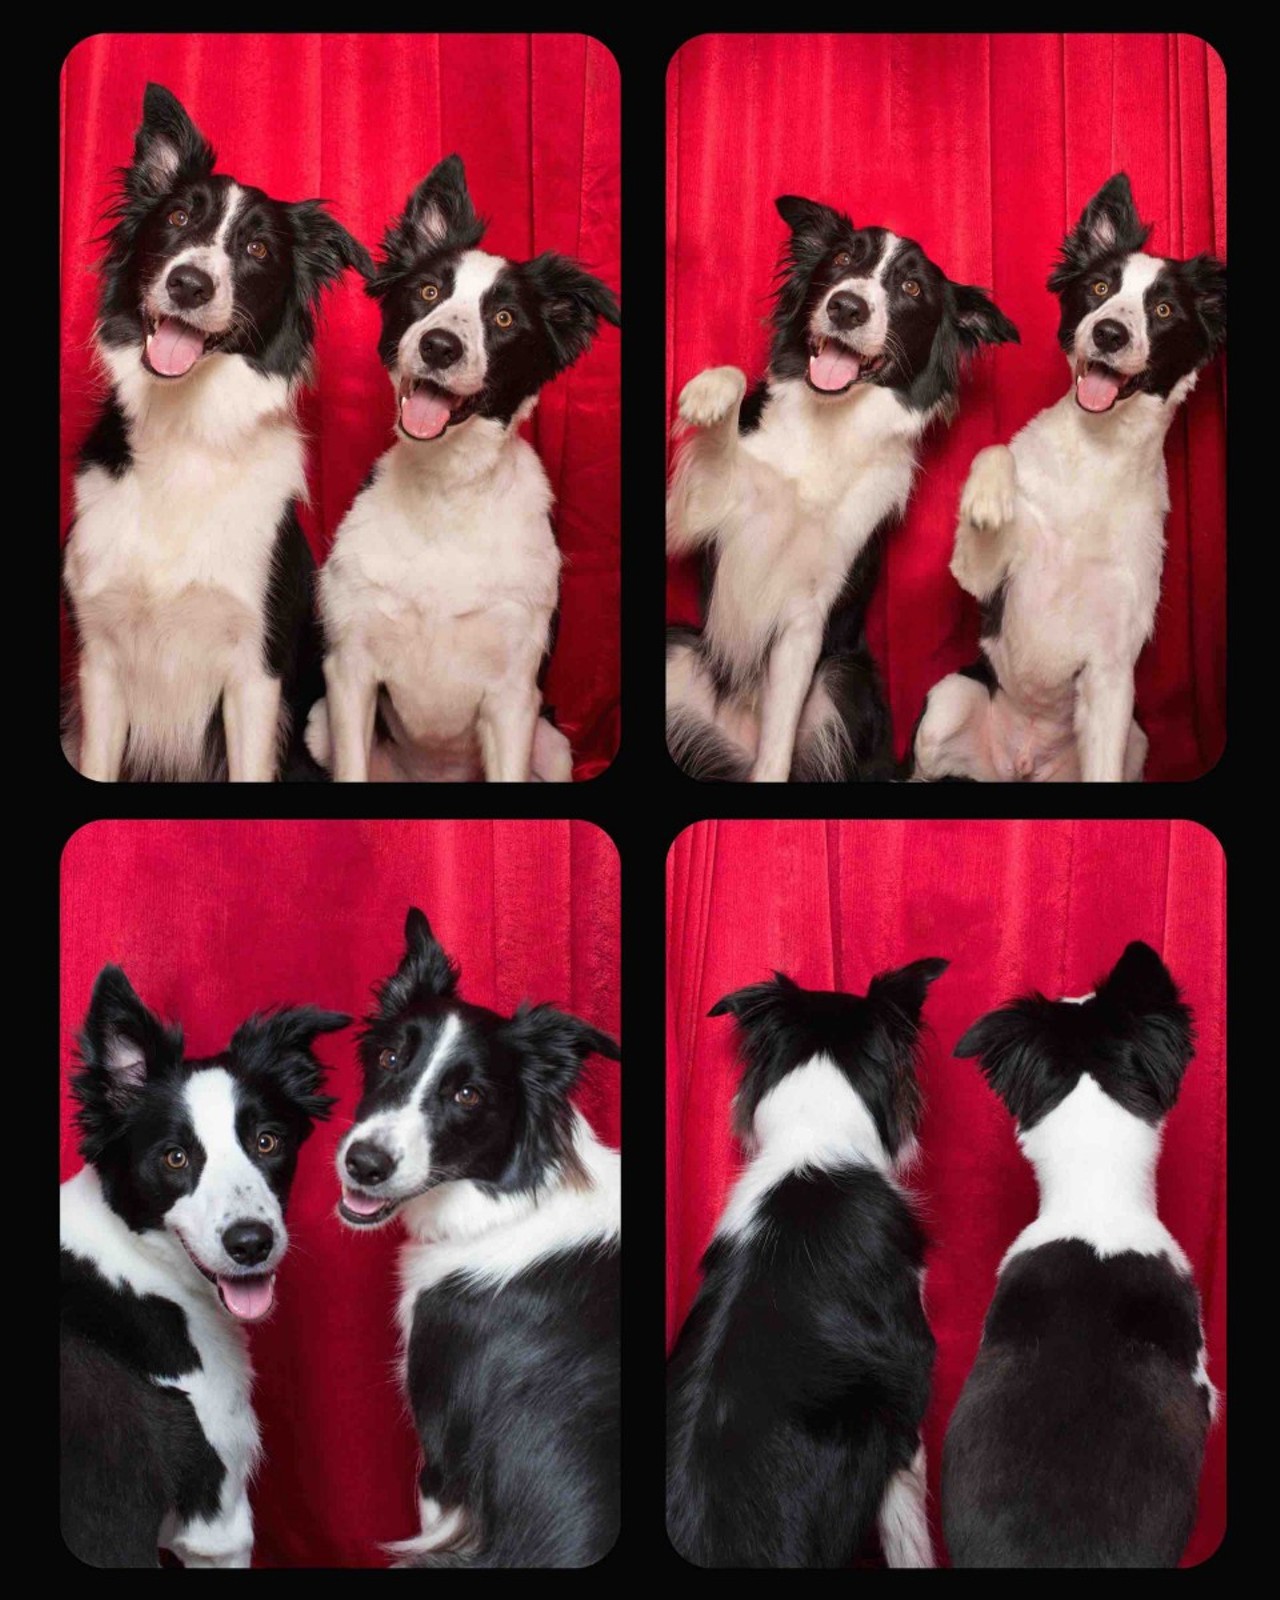 We so want to hang out with these border collies!